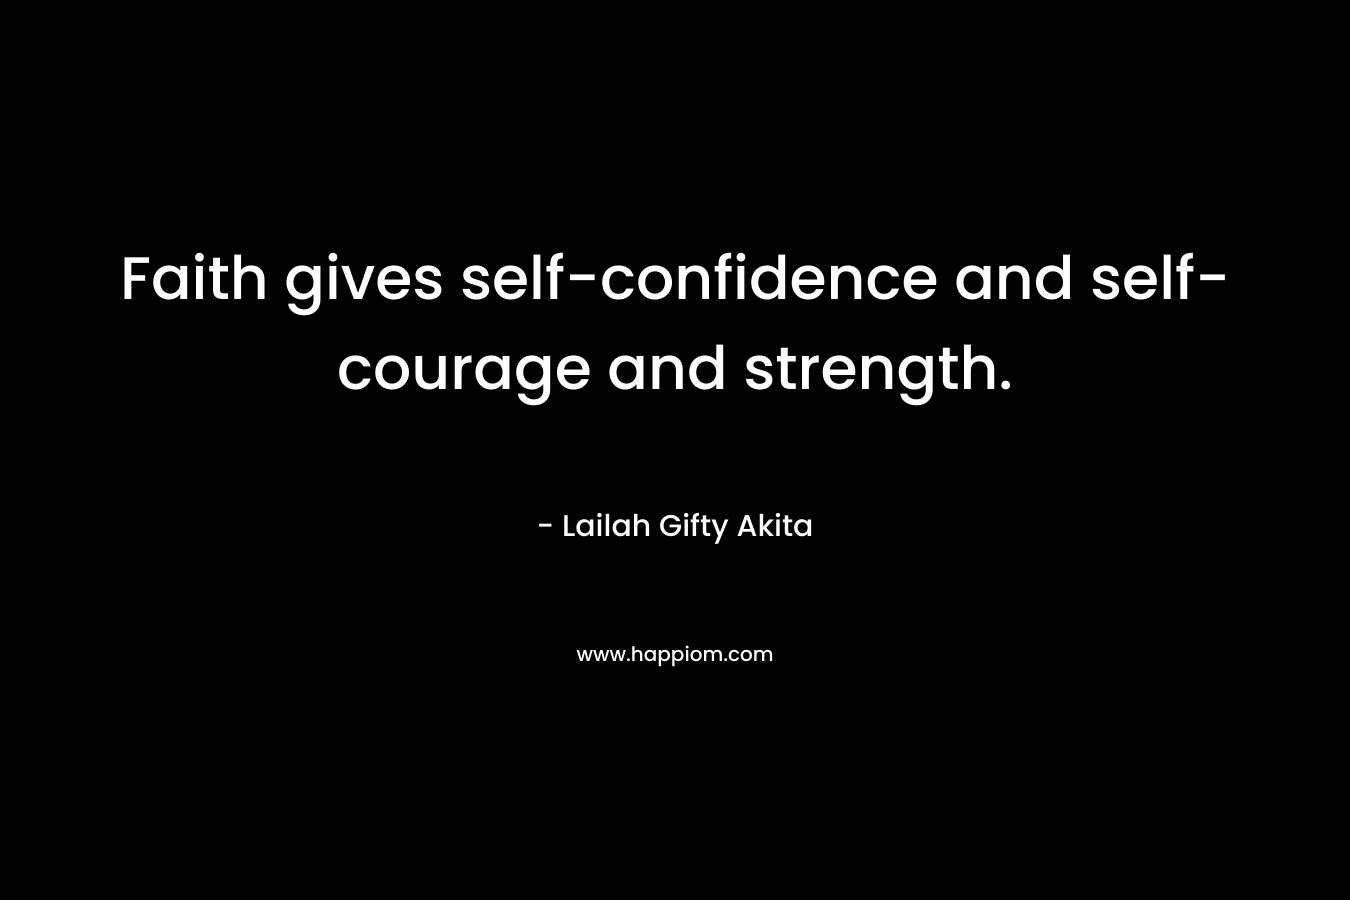 Faith gives self-confidence and self-courage and strength.